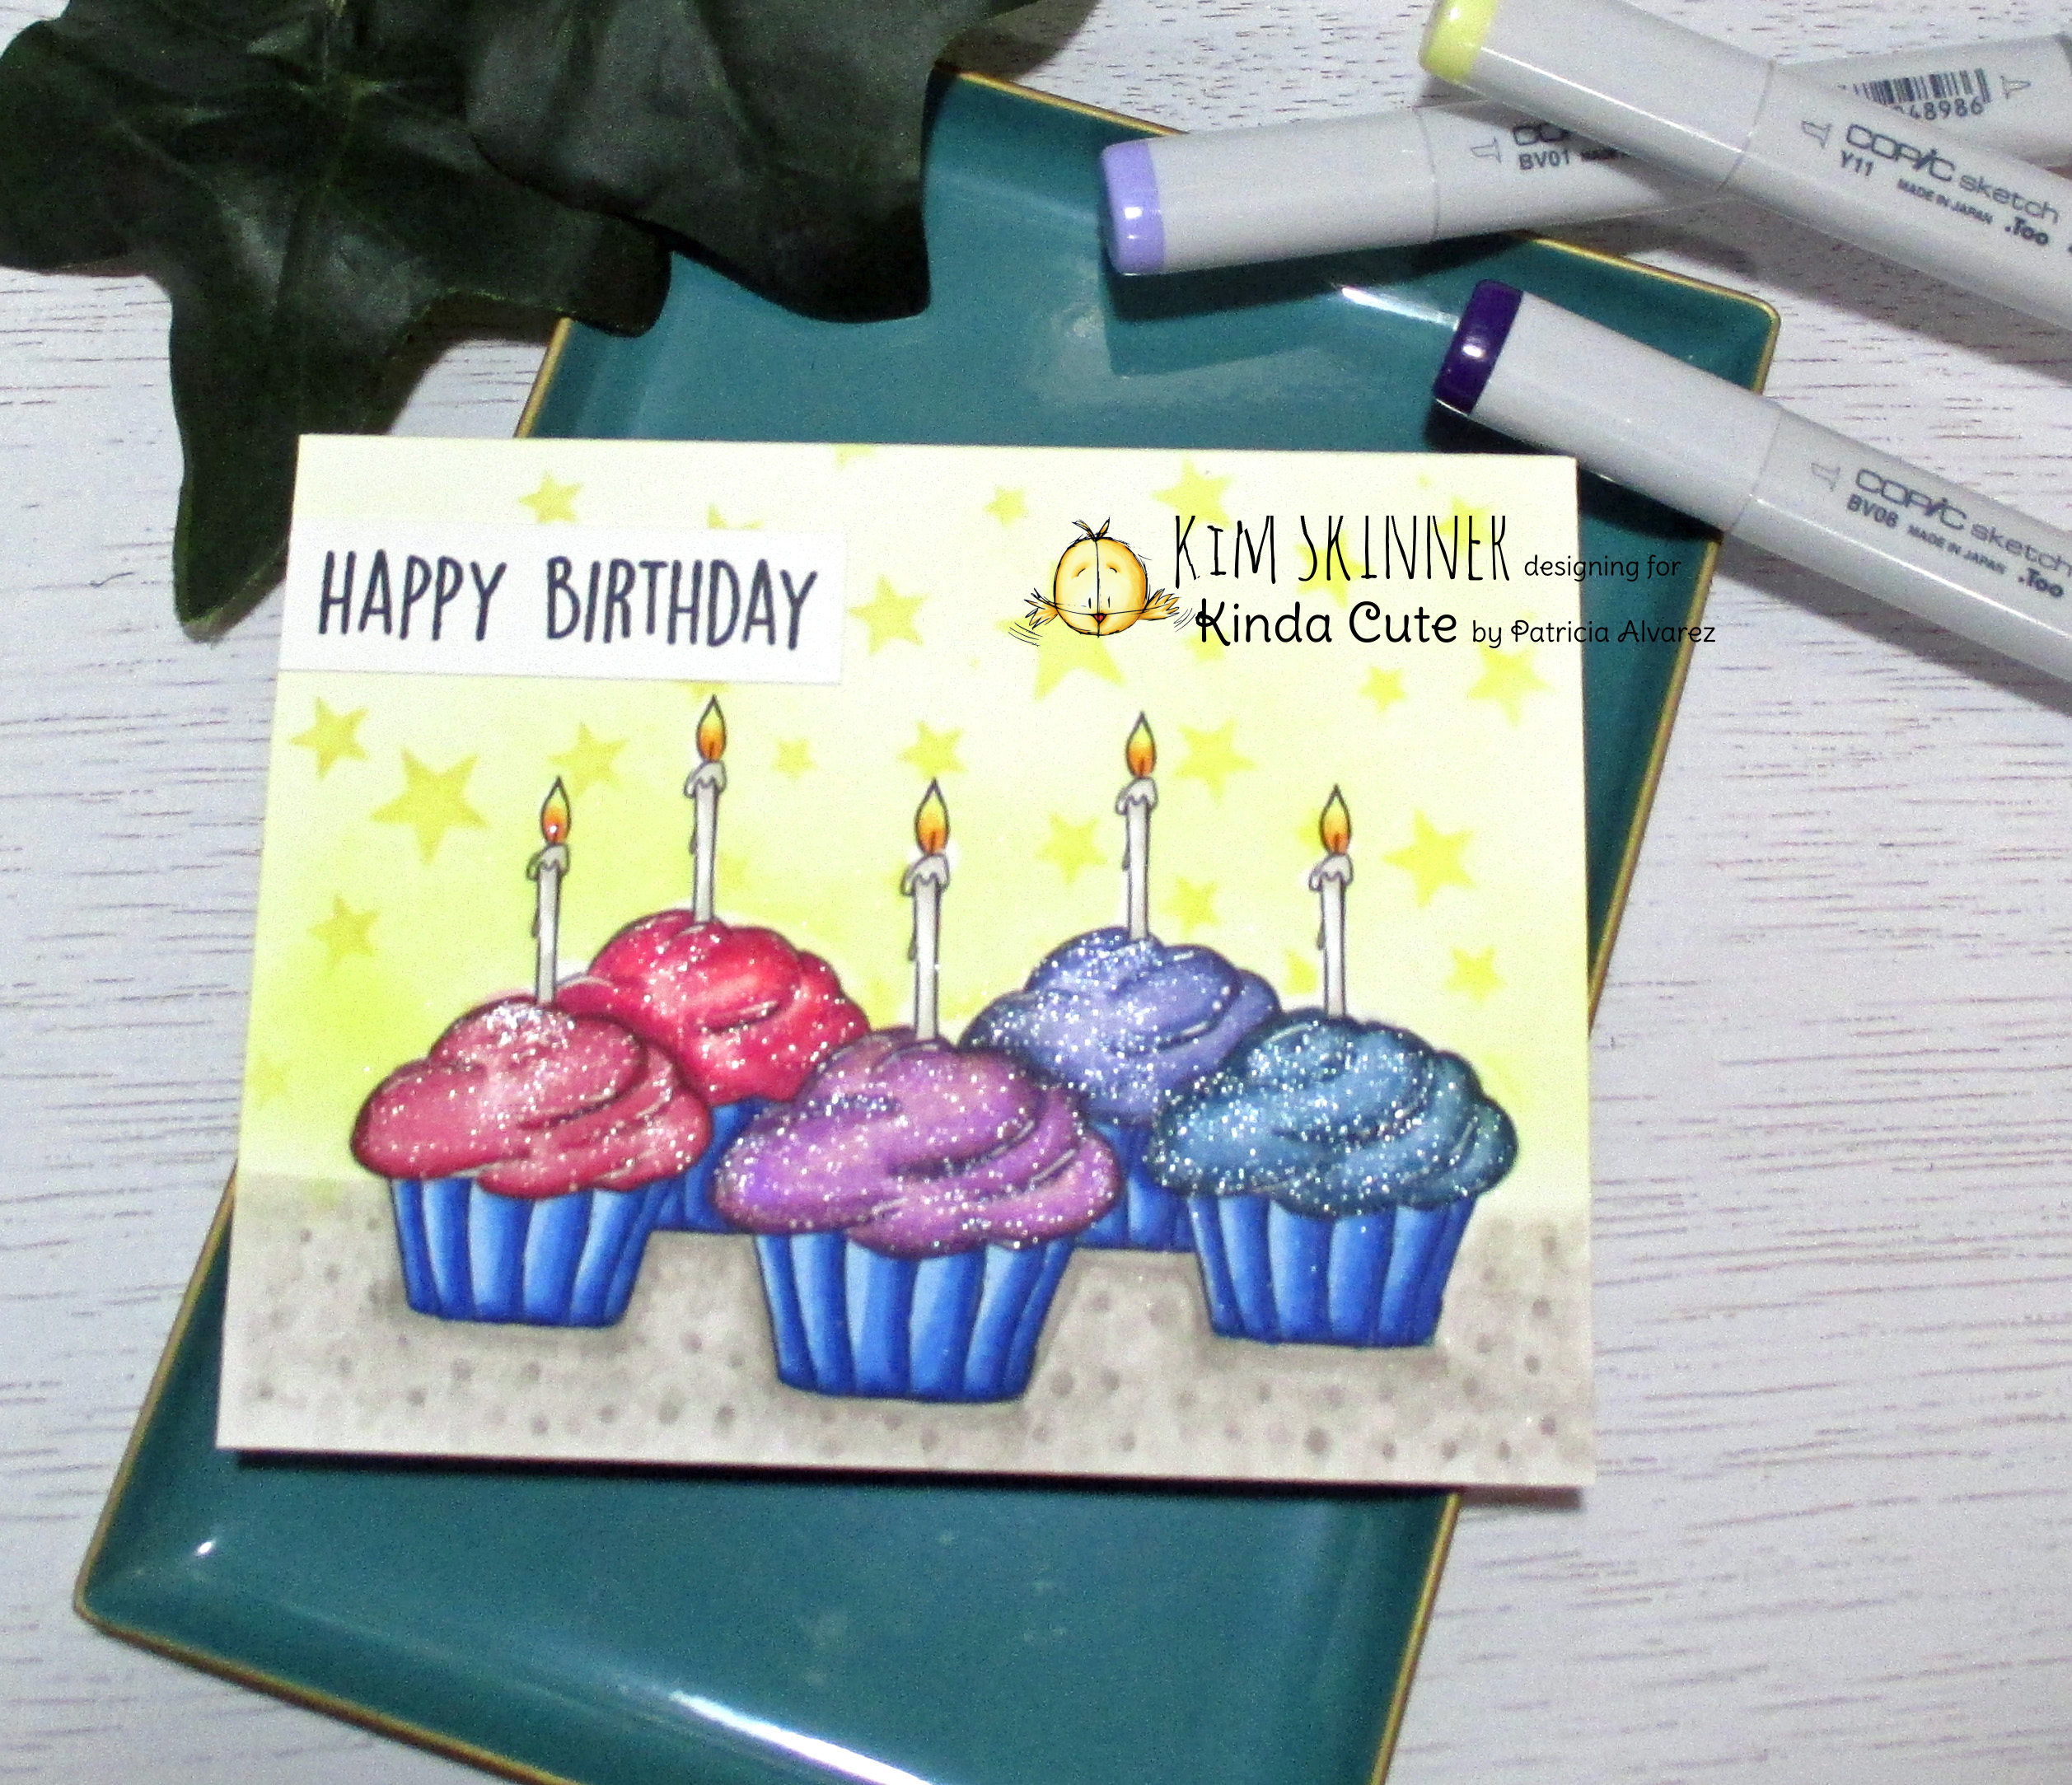 Digital Stamps: Create Happy Birthday Cards by Combining Images! – Stamping  Imperfection